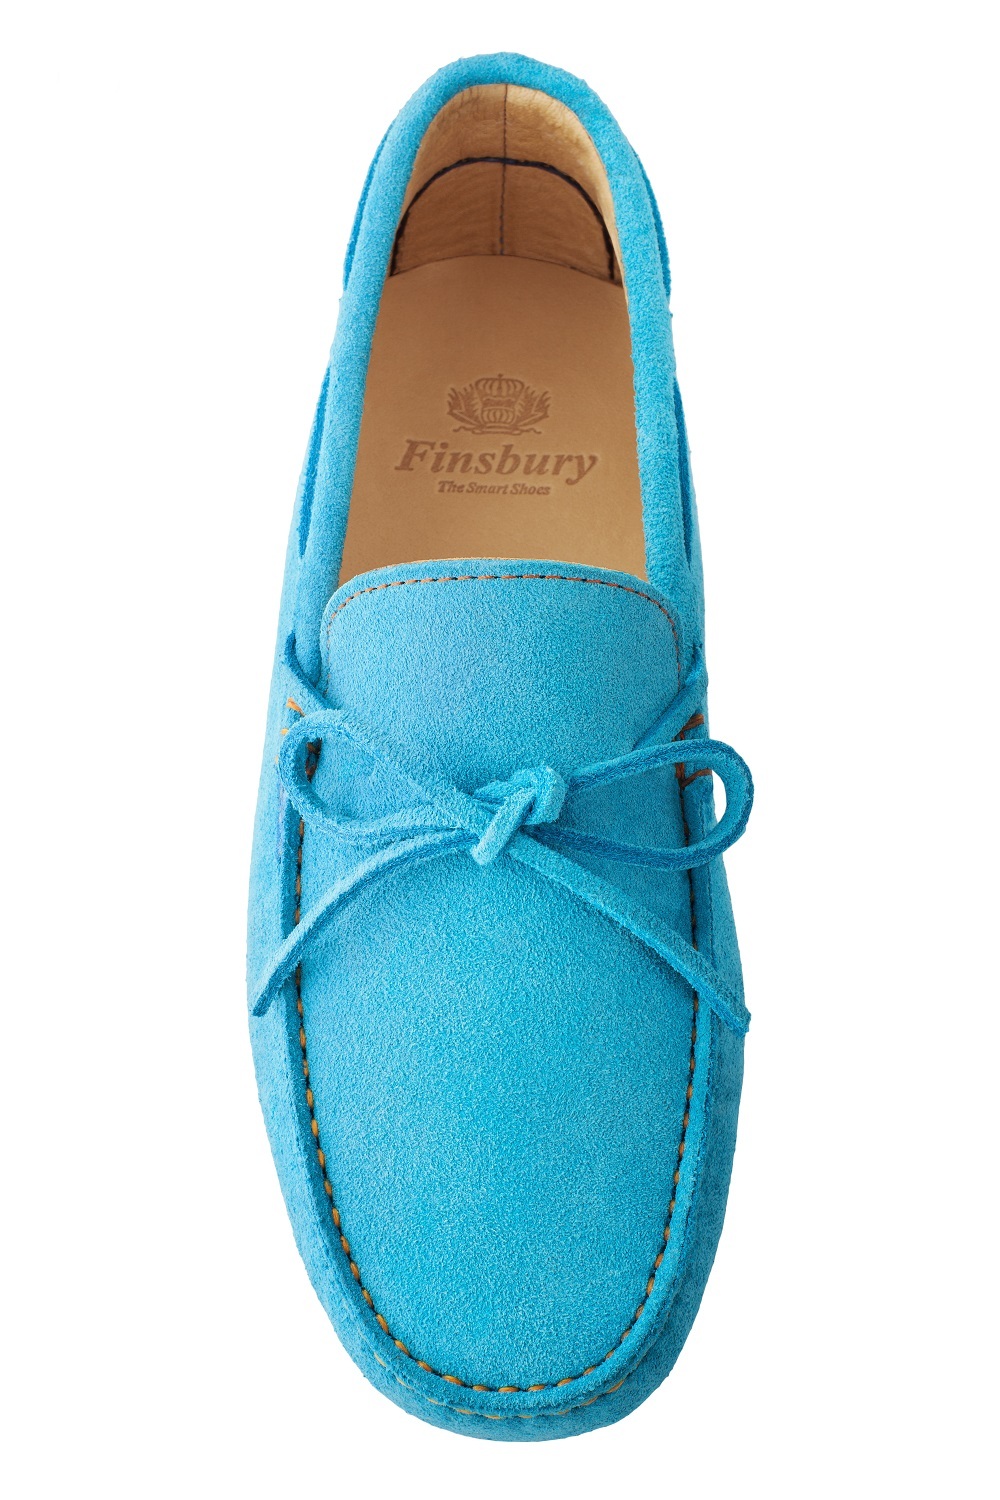 Gino Turquoise Suede Men's Loafers - Finsbury Shoes